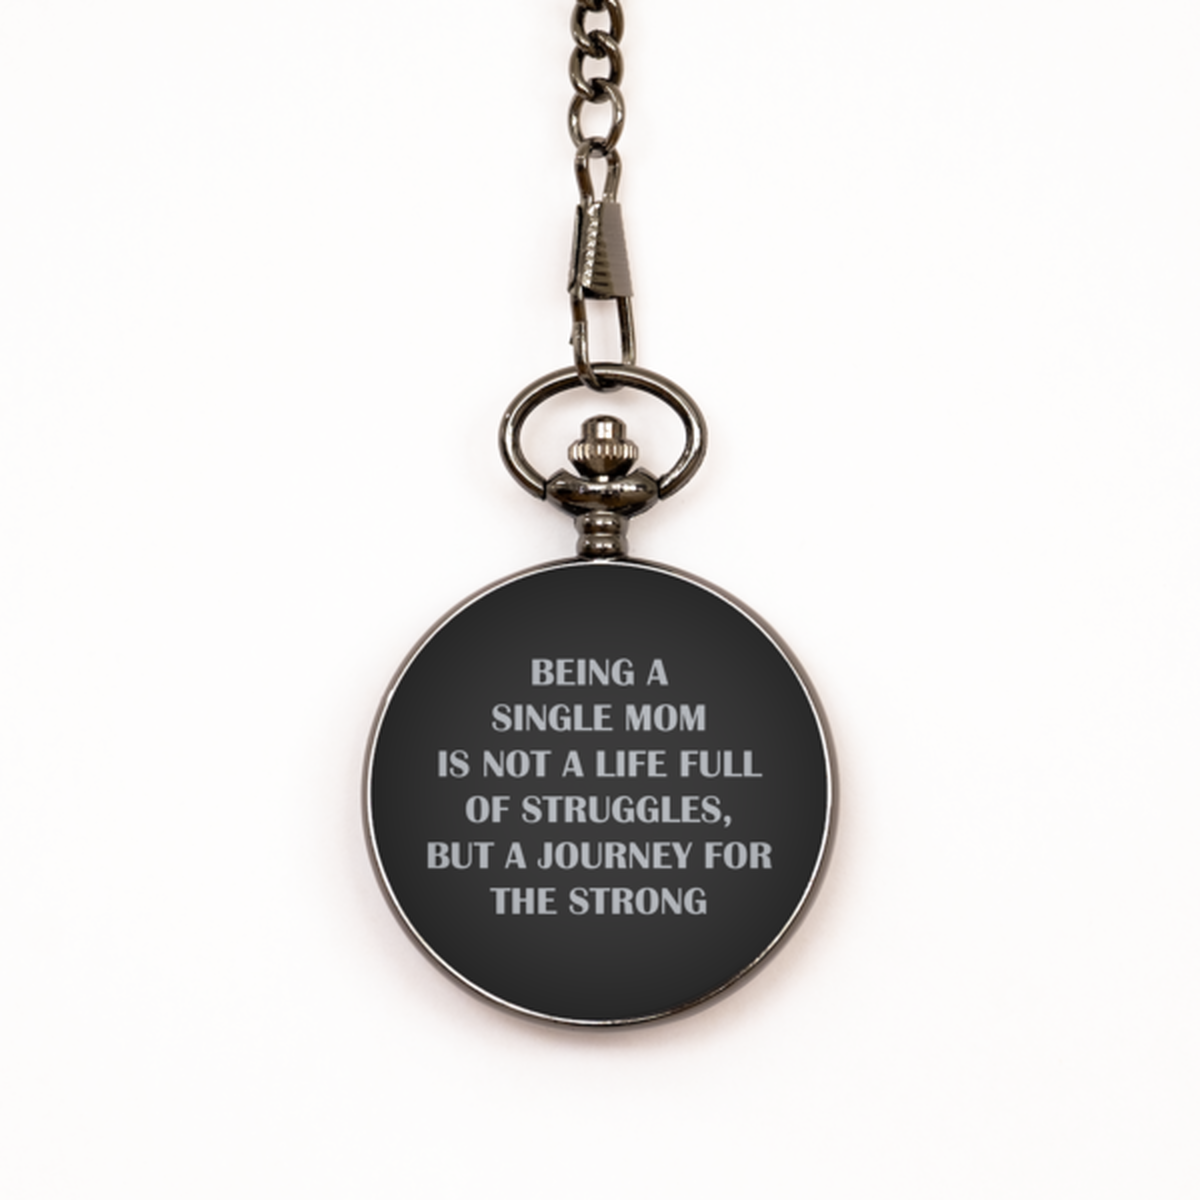 To My Single Mom Black Pocket Watch, Journey For The Strong, Mothers Day Gifts For Single Mom From Friends, Birthday Gifts For Women